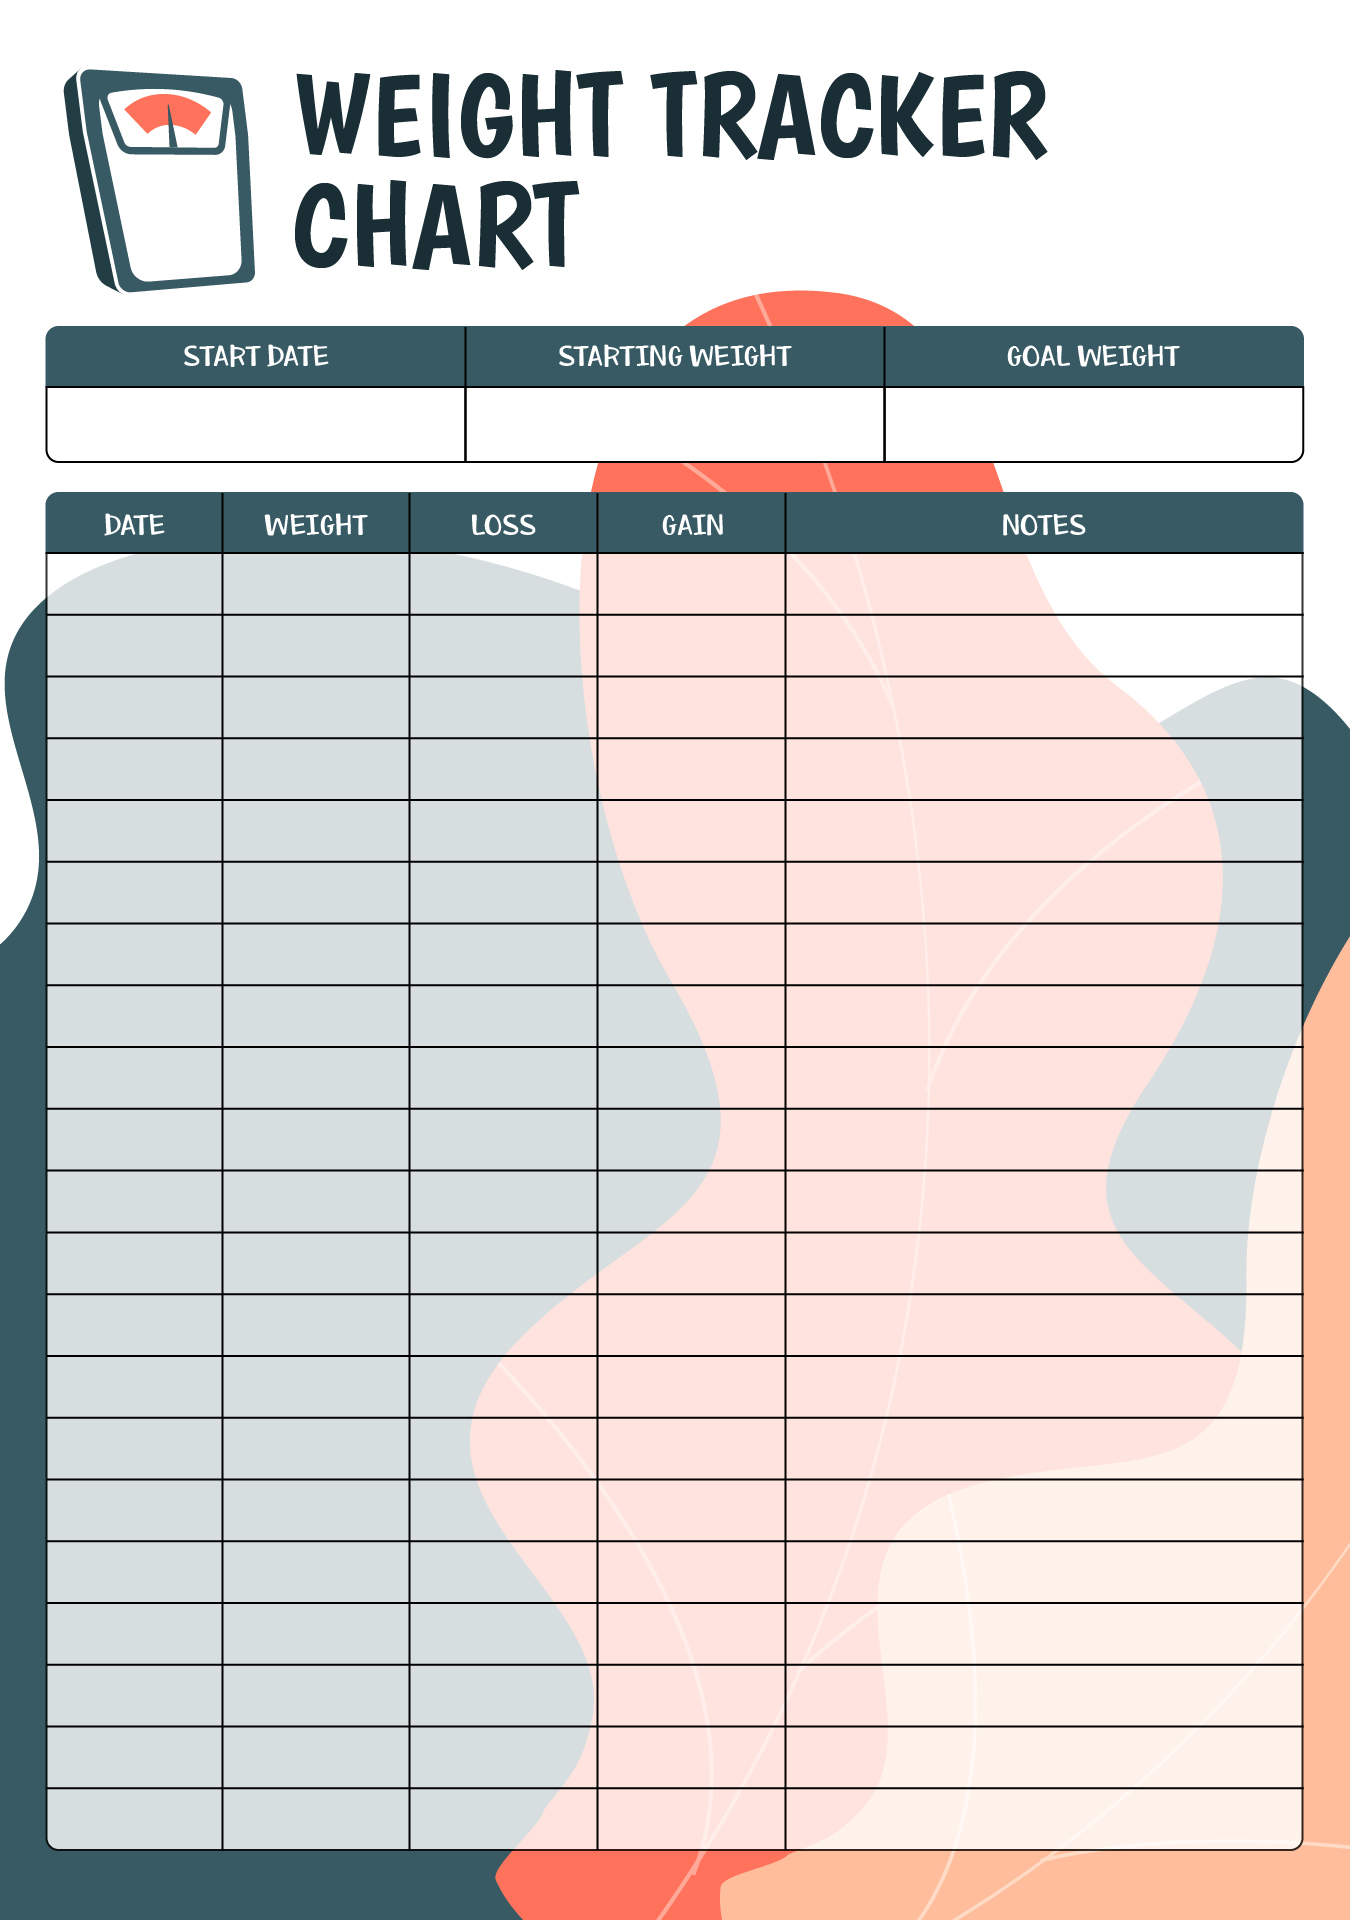 7-best-images-of-weekly-weight-loss-tracker-printable-weekly-weight-loss-tracker-template